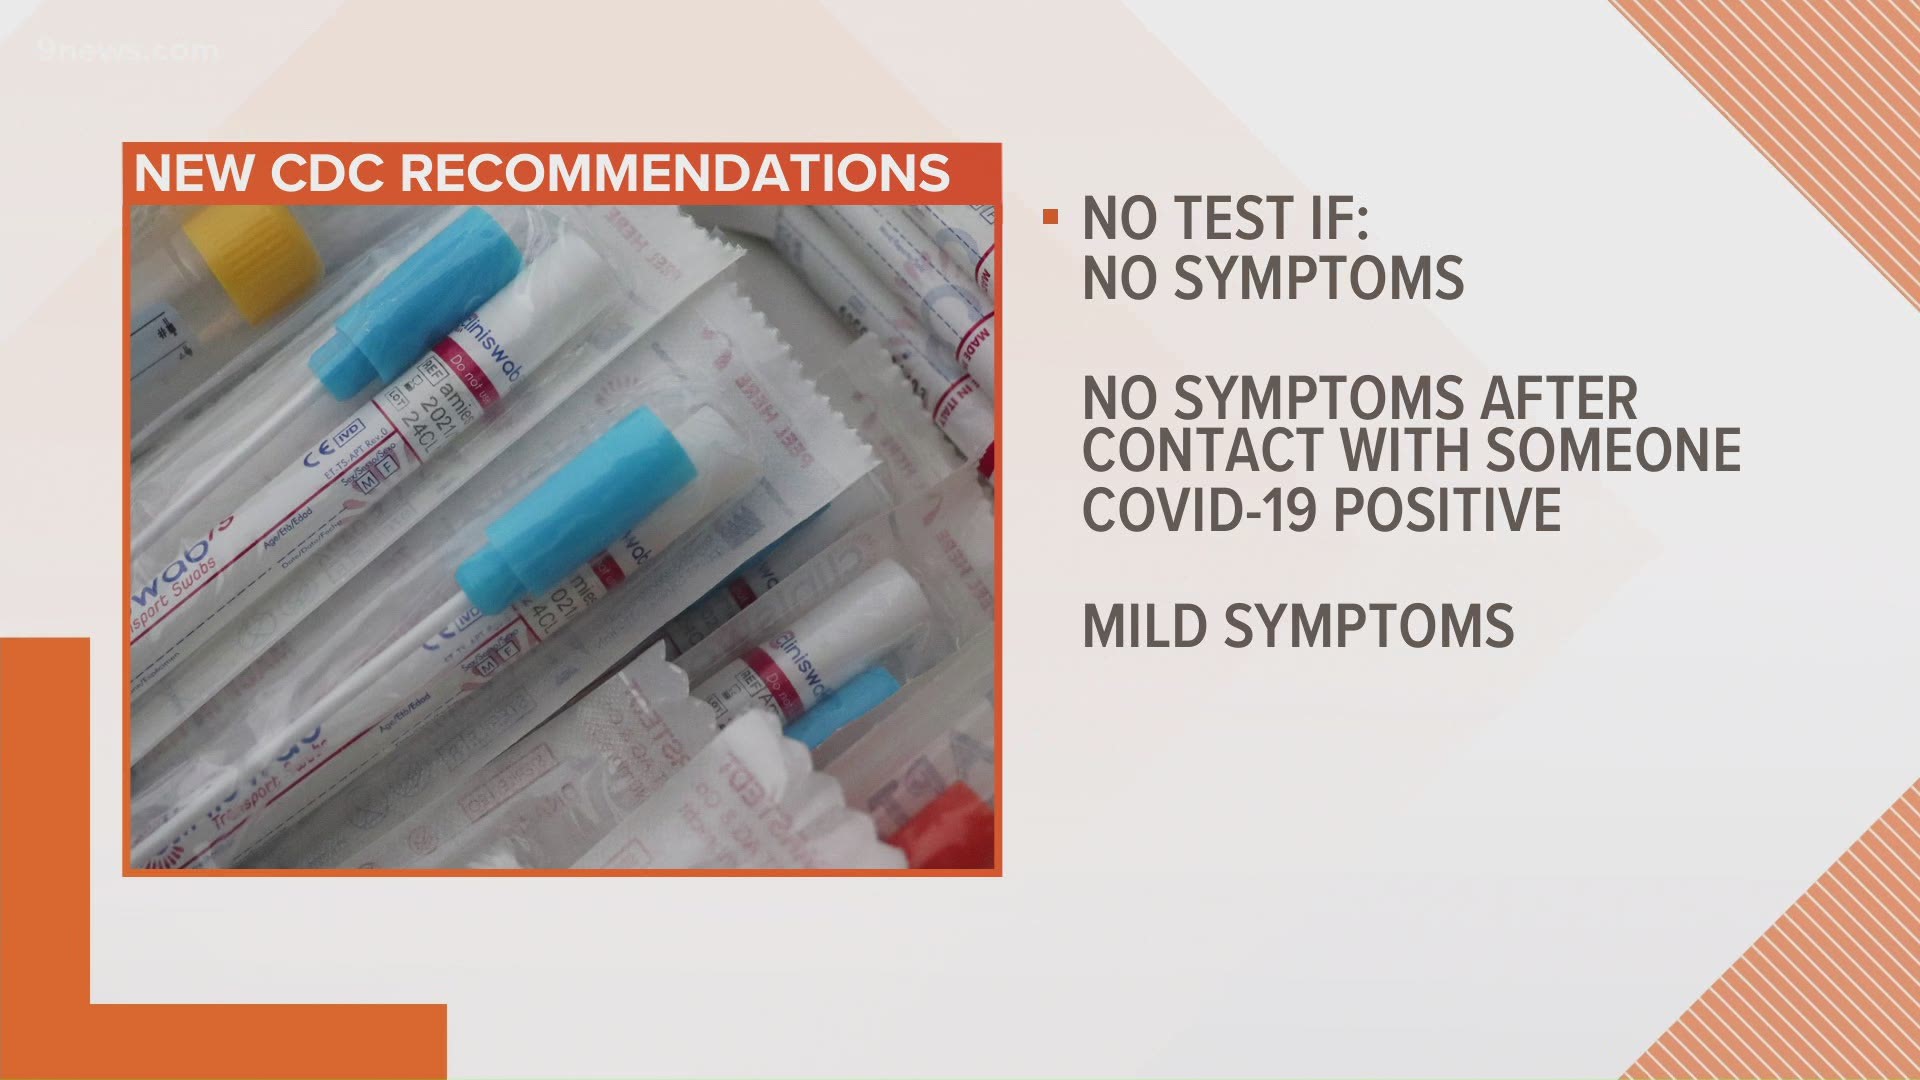 9Health Expert, Dr. Payal Kohli, discusses the new COVID-19 testing recommendations from the Centers for Disease Control and Prevention.